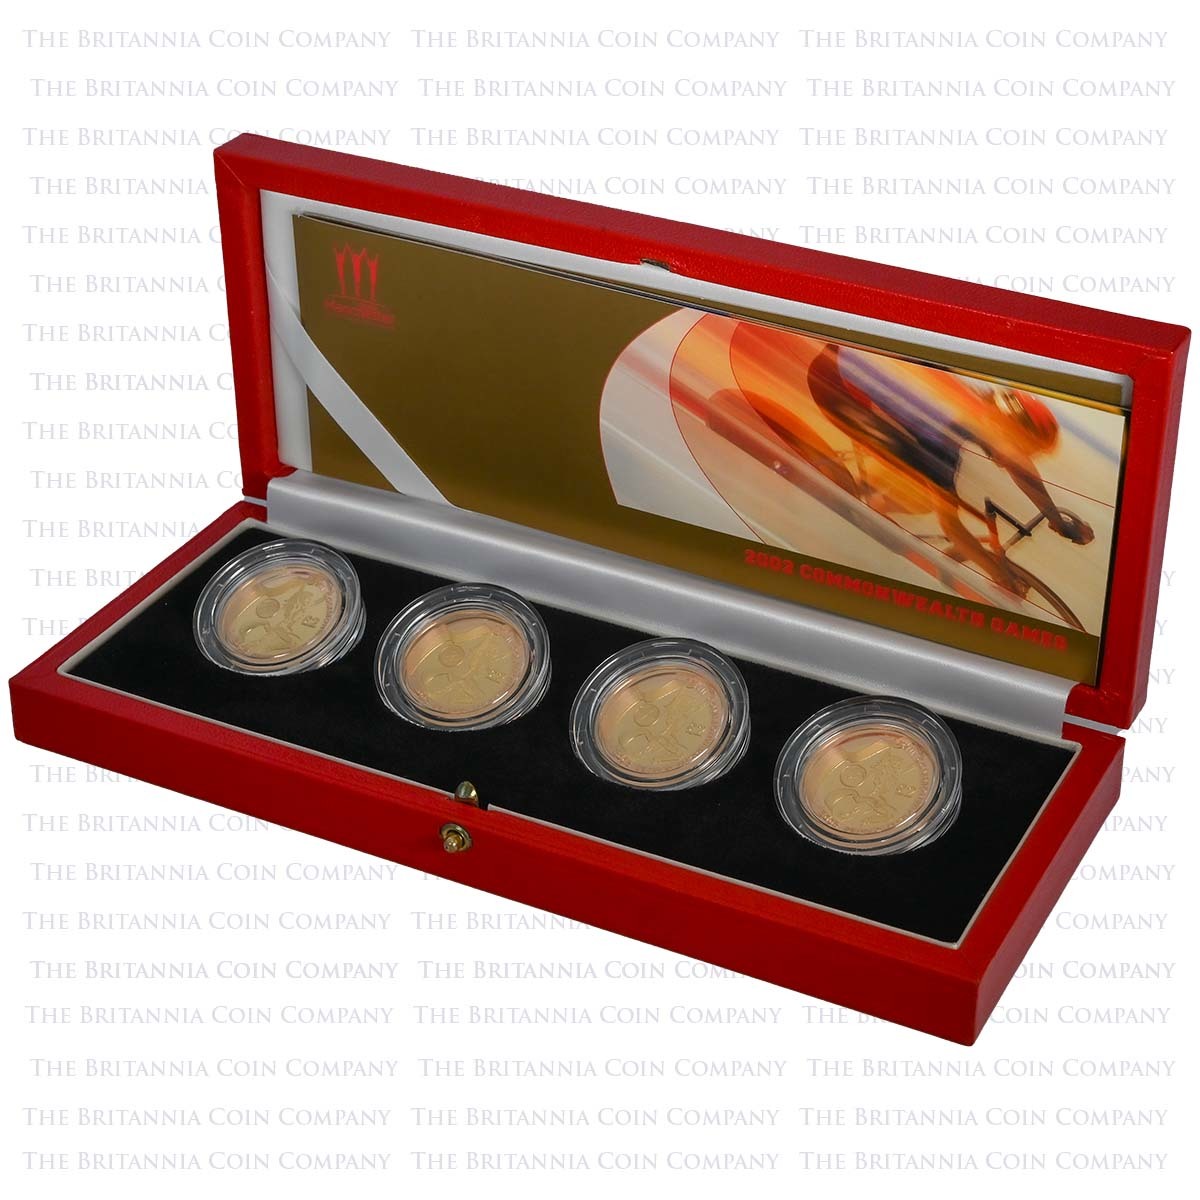 UKCGGS 2002 Manchester Commonwealth Games Two Pound Gold Proof 4 Coin Set Boxed